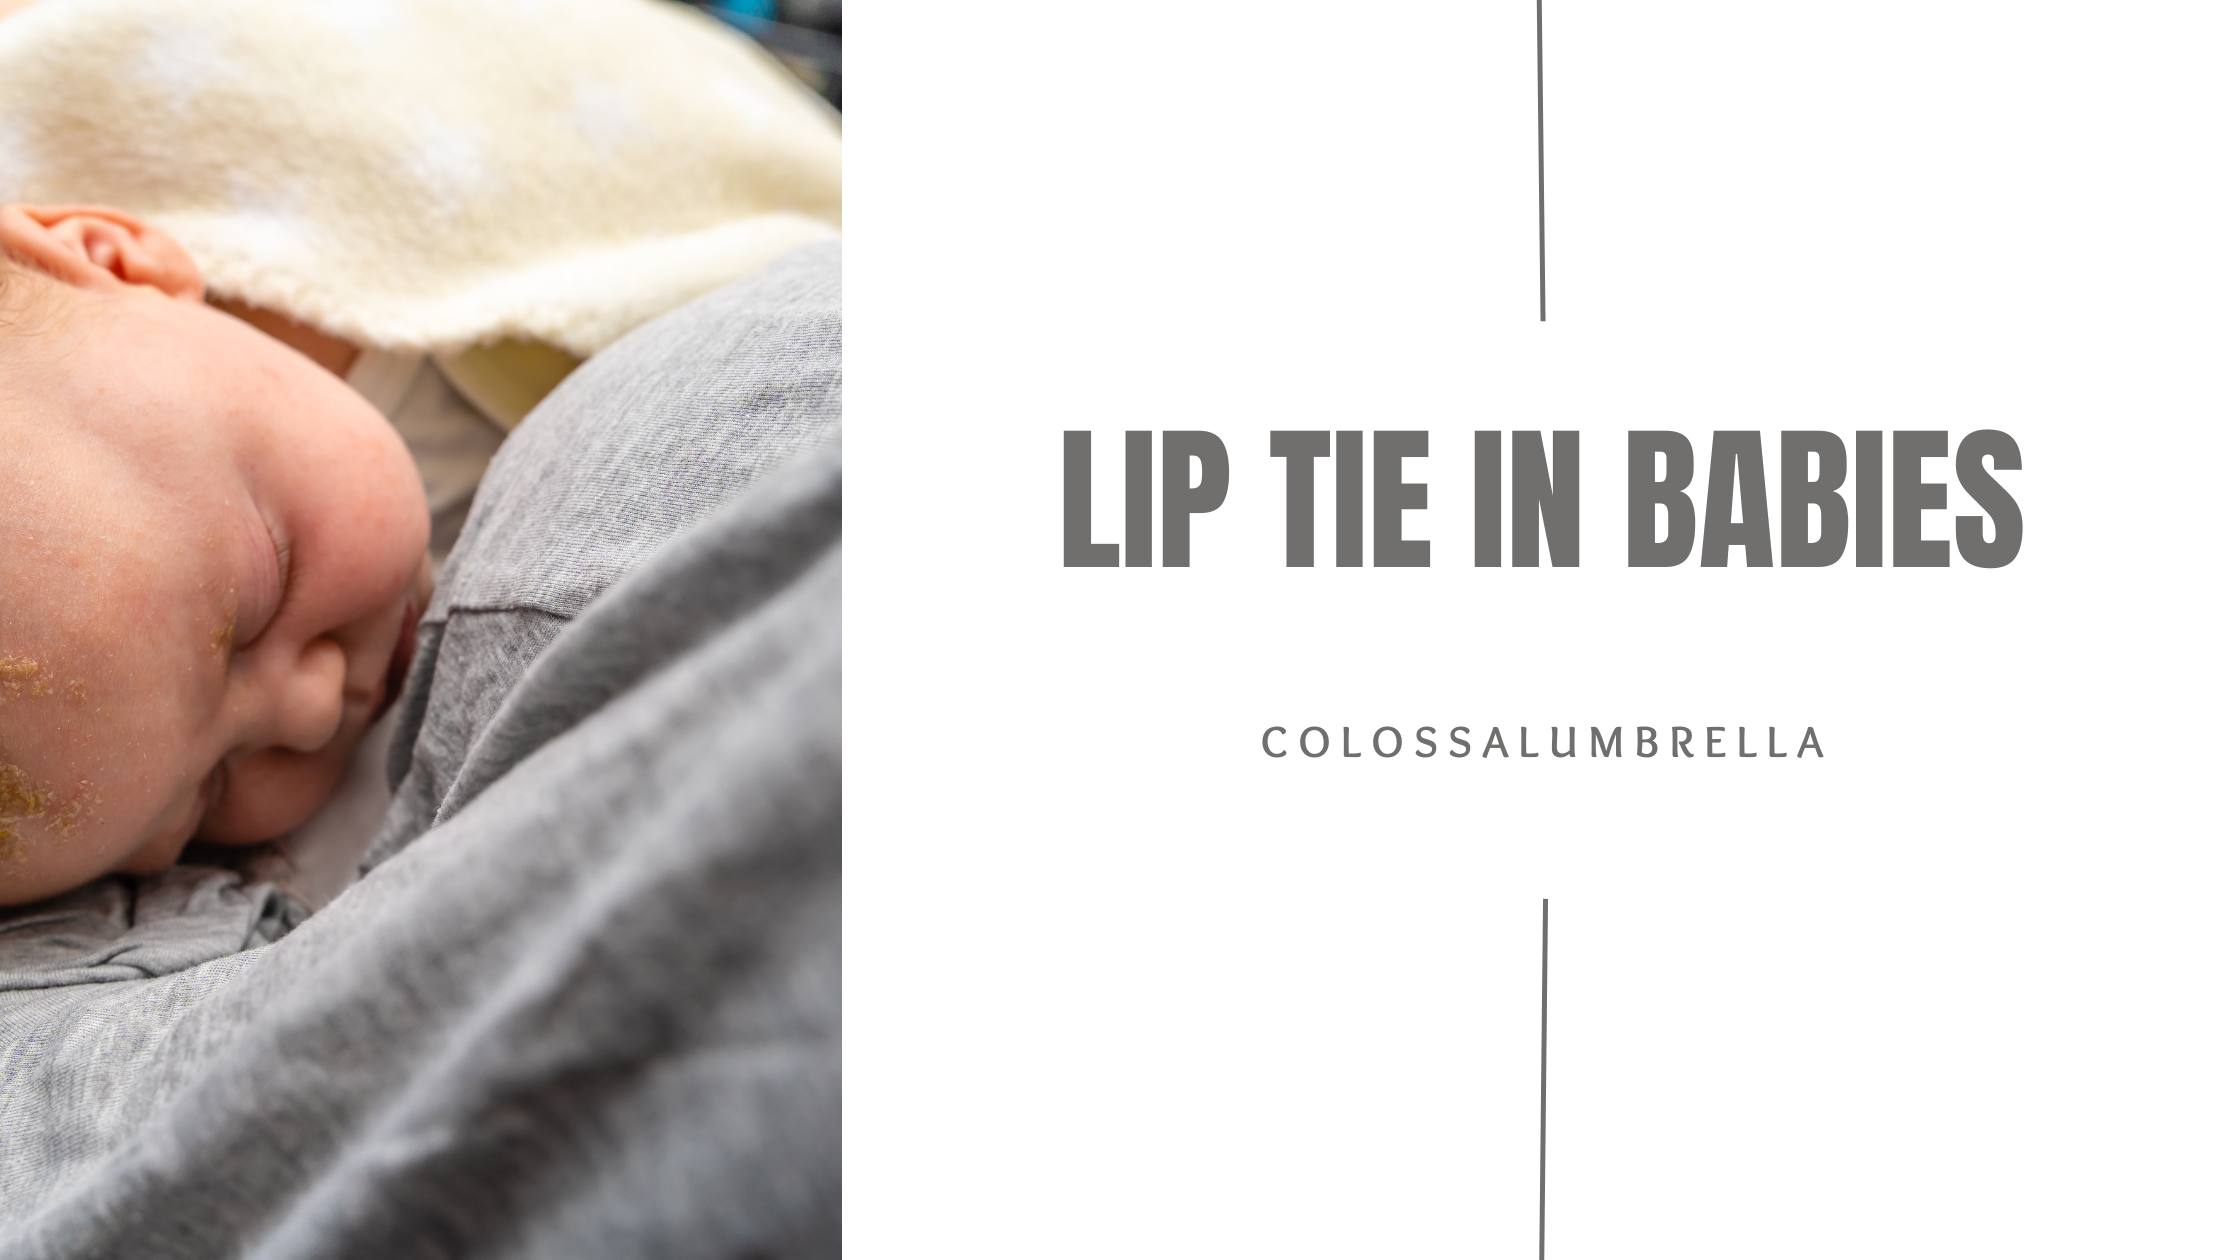 Babies Lip Tie Problems Later in Life: Causes, Symptoms, and Treatment